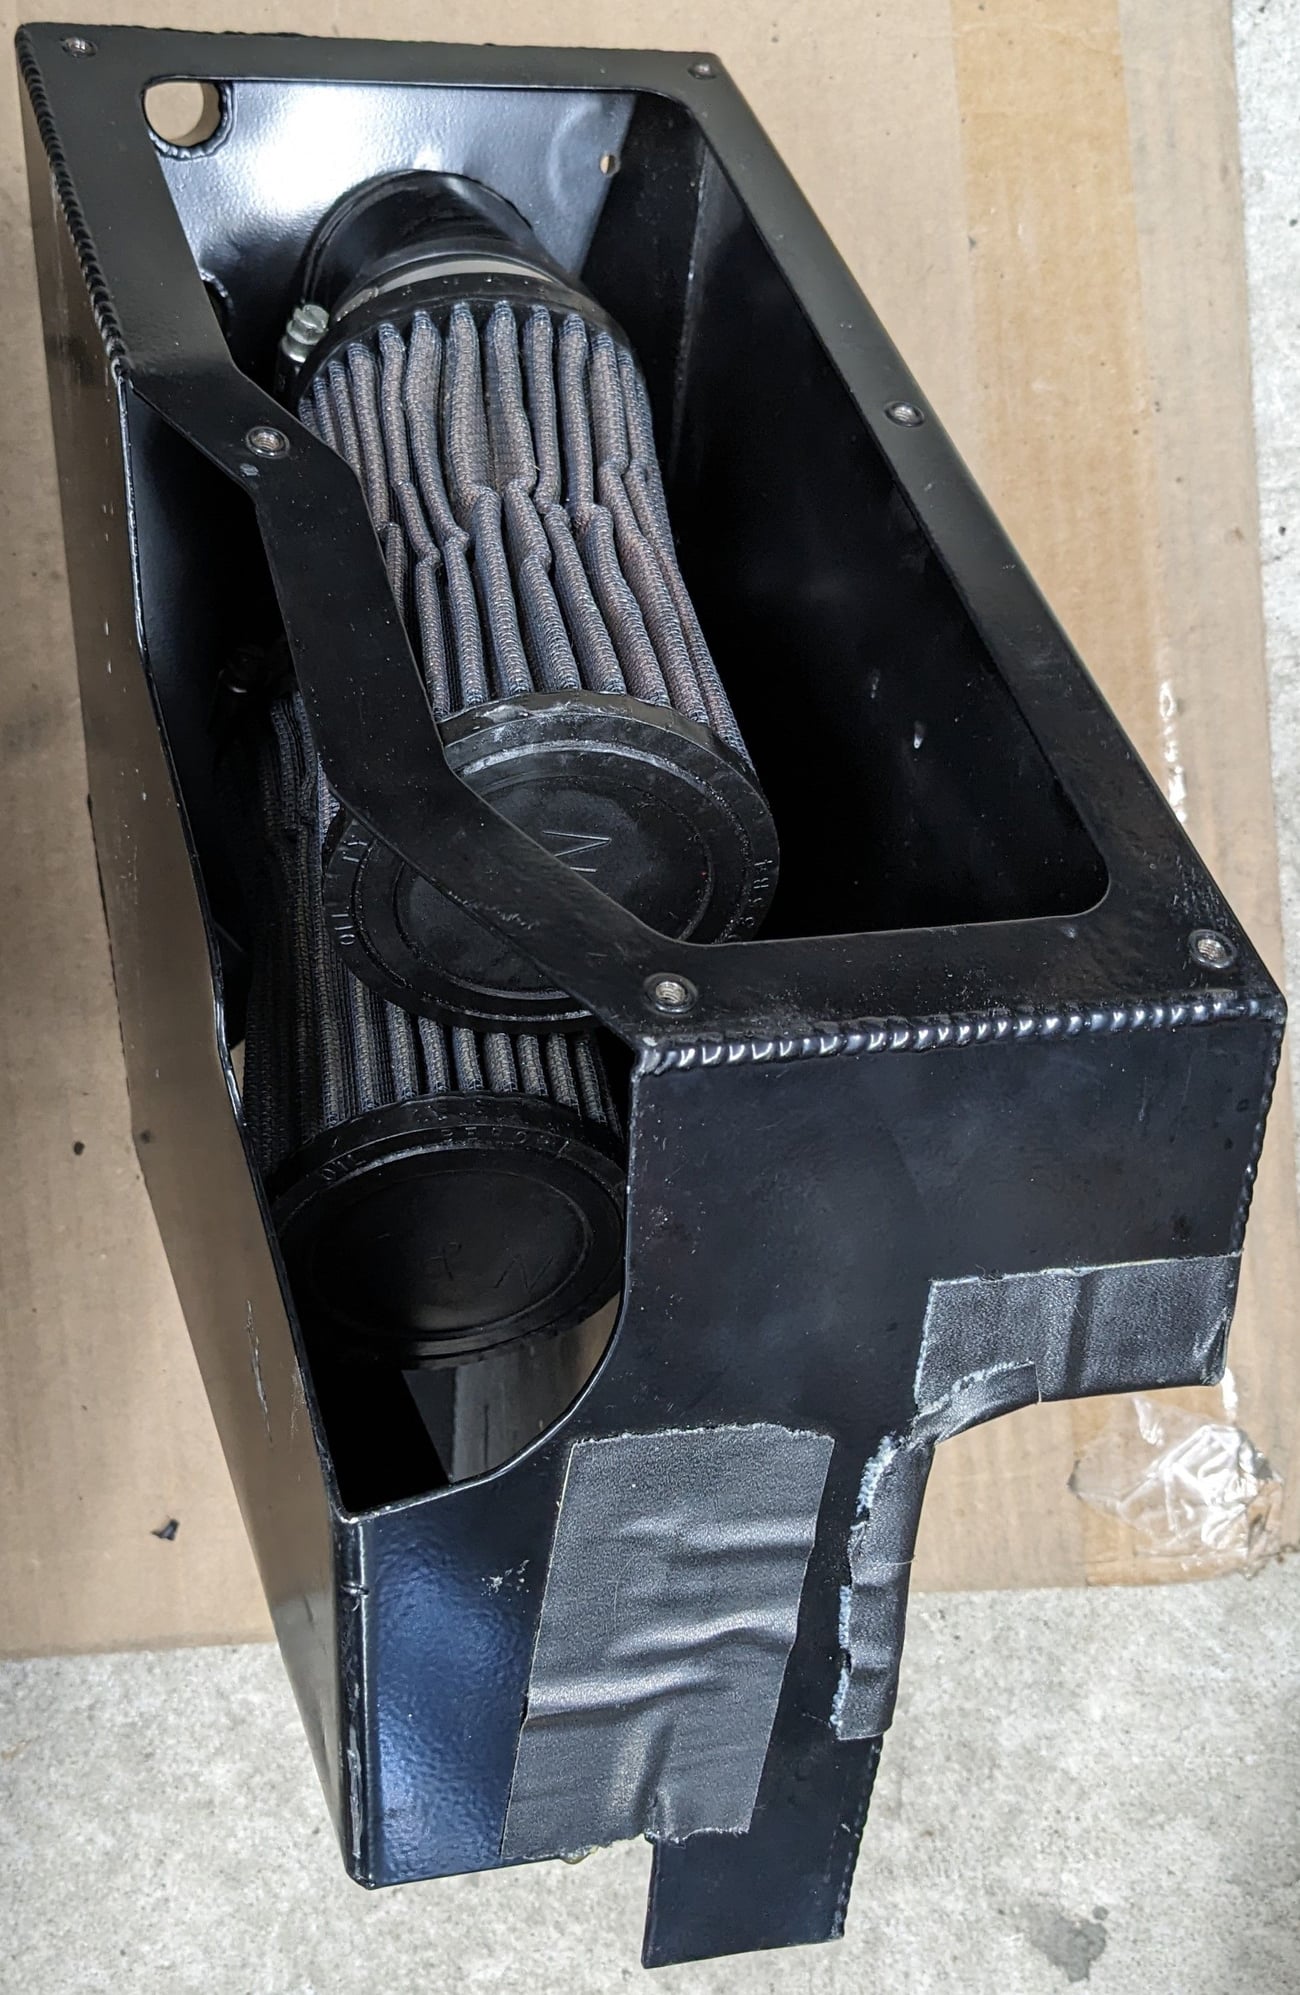 Engine - Intake/Fuel - M2 style aluminum intake box - Used - 1993 to 1995 Mazda RX-7 - Roselle, IL 60172, United States